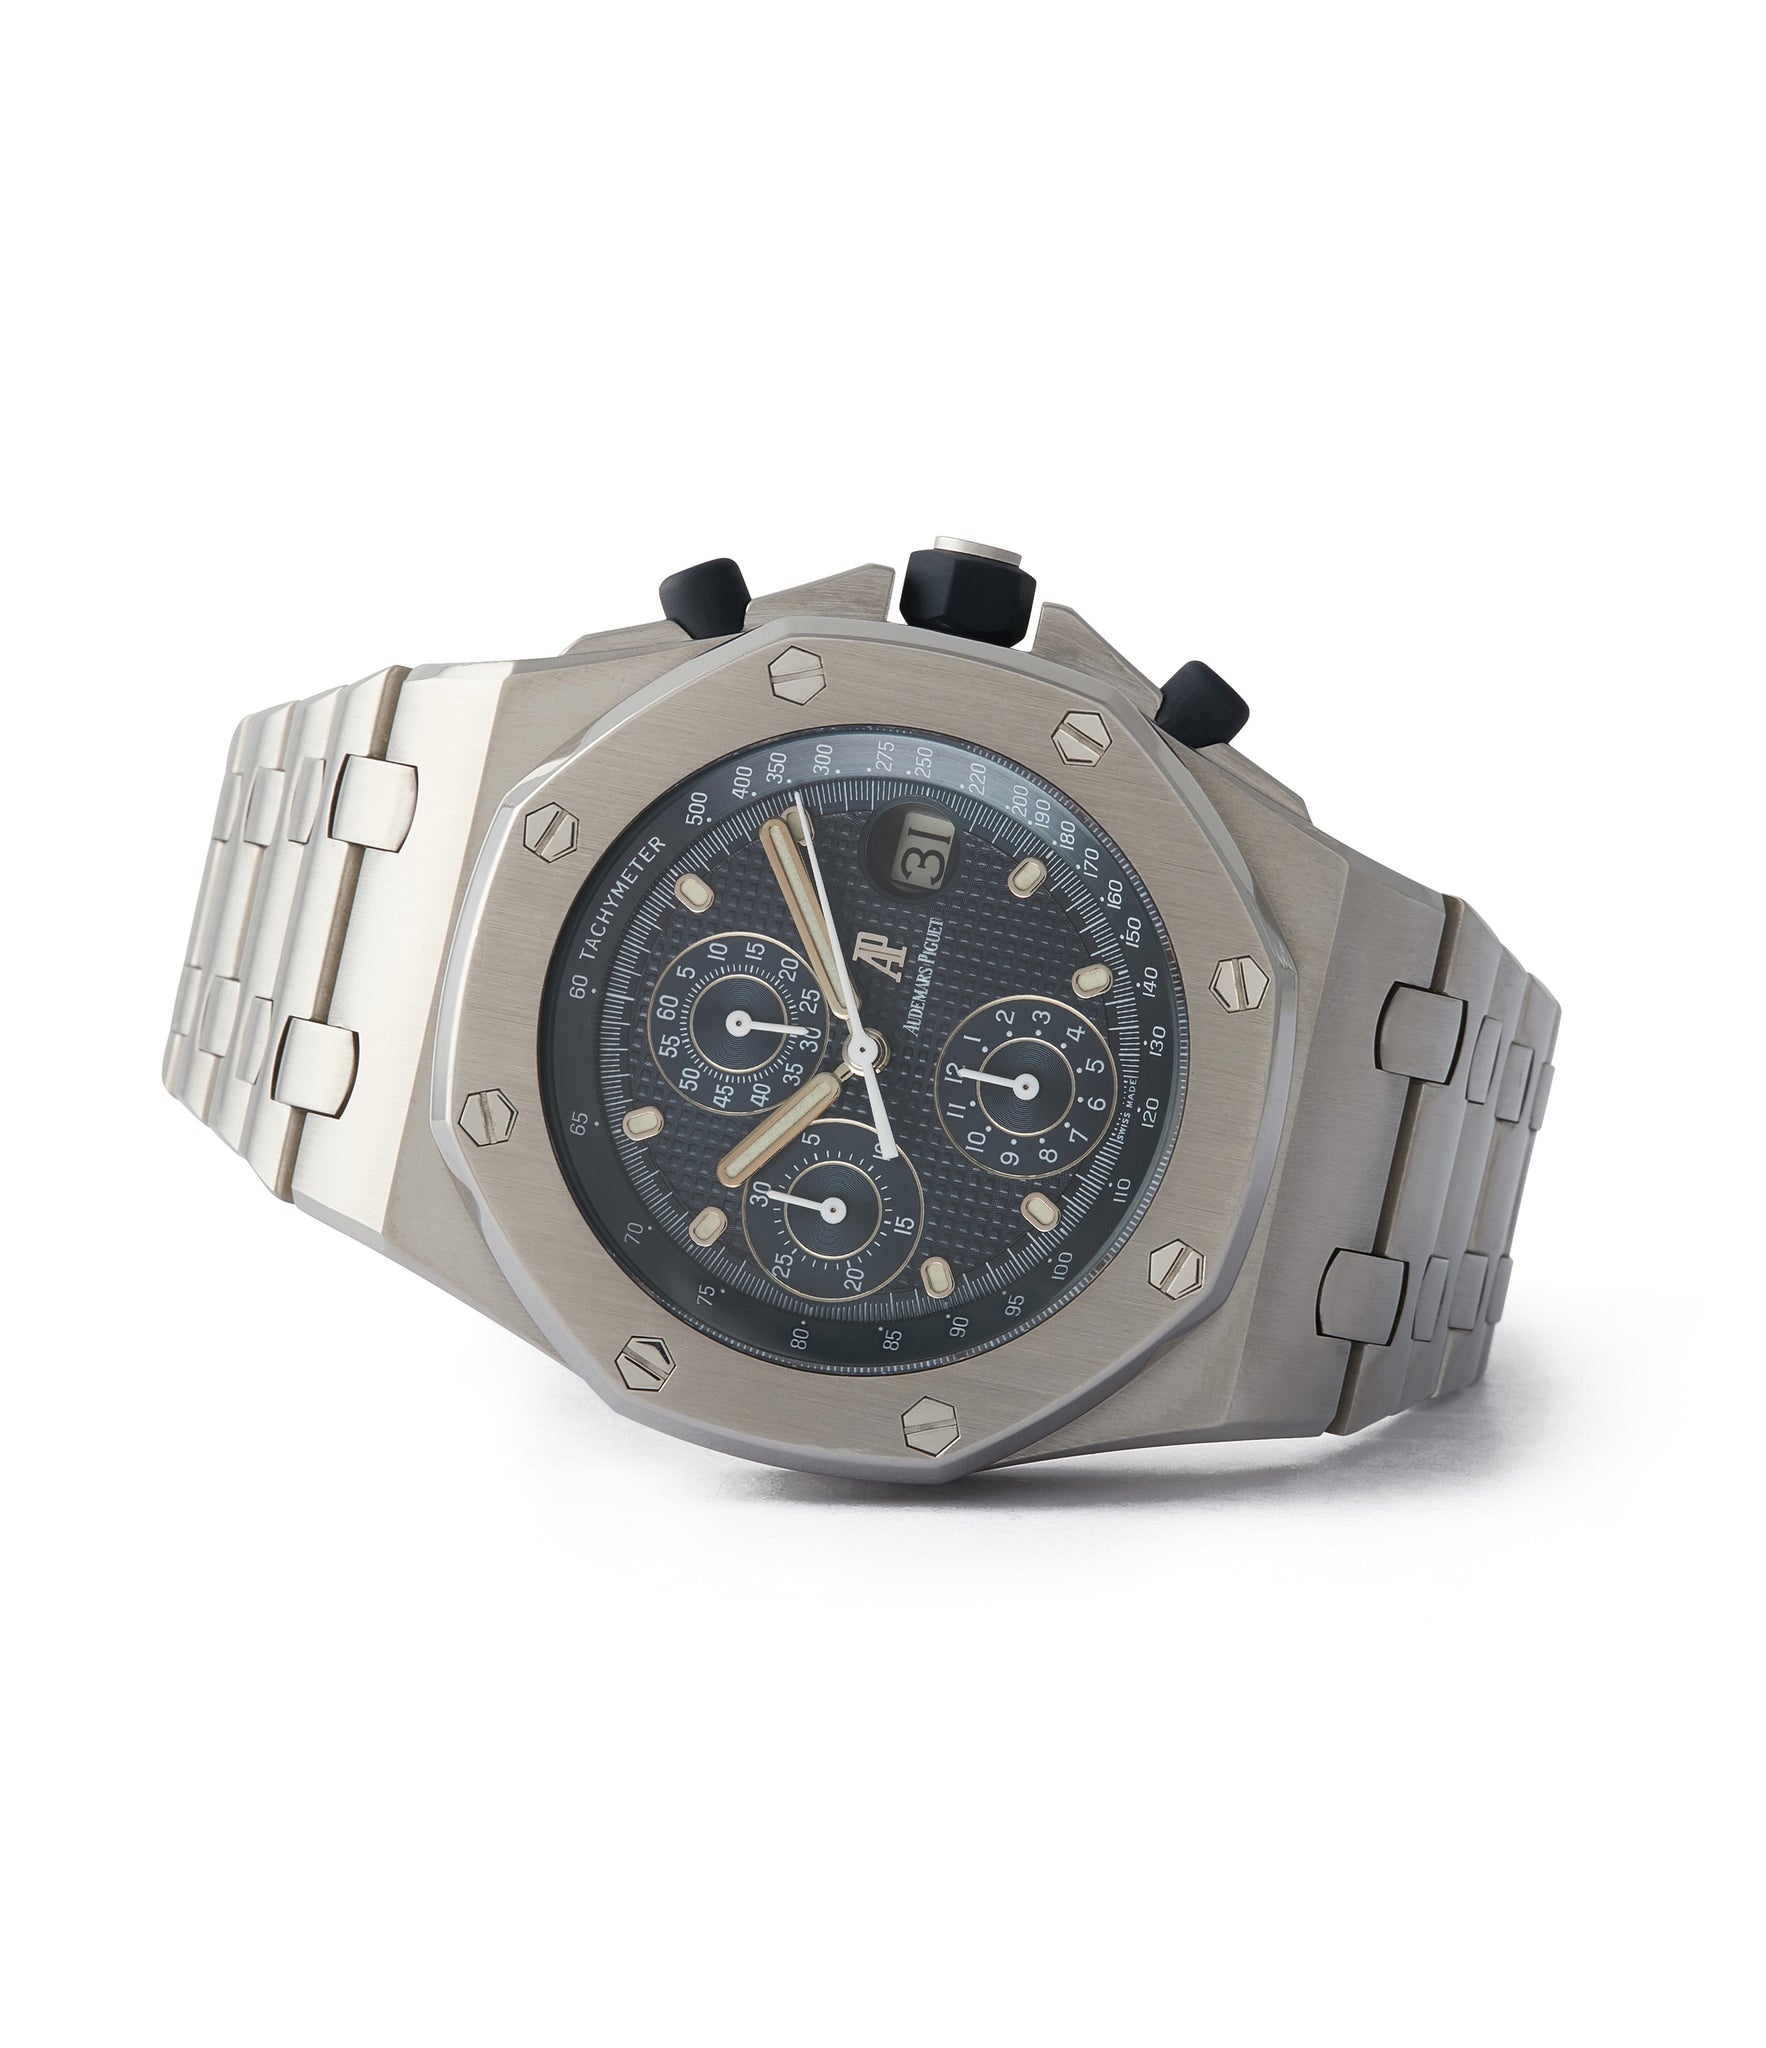 consign Audemars Piguet Royal Oak Offshore 'The Beast' 25721 steel vintage chronograph watch for sale online A Collected Man London UK specialist of rare watches